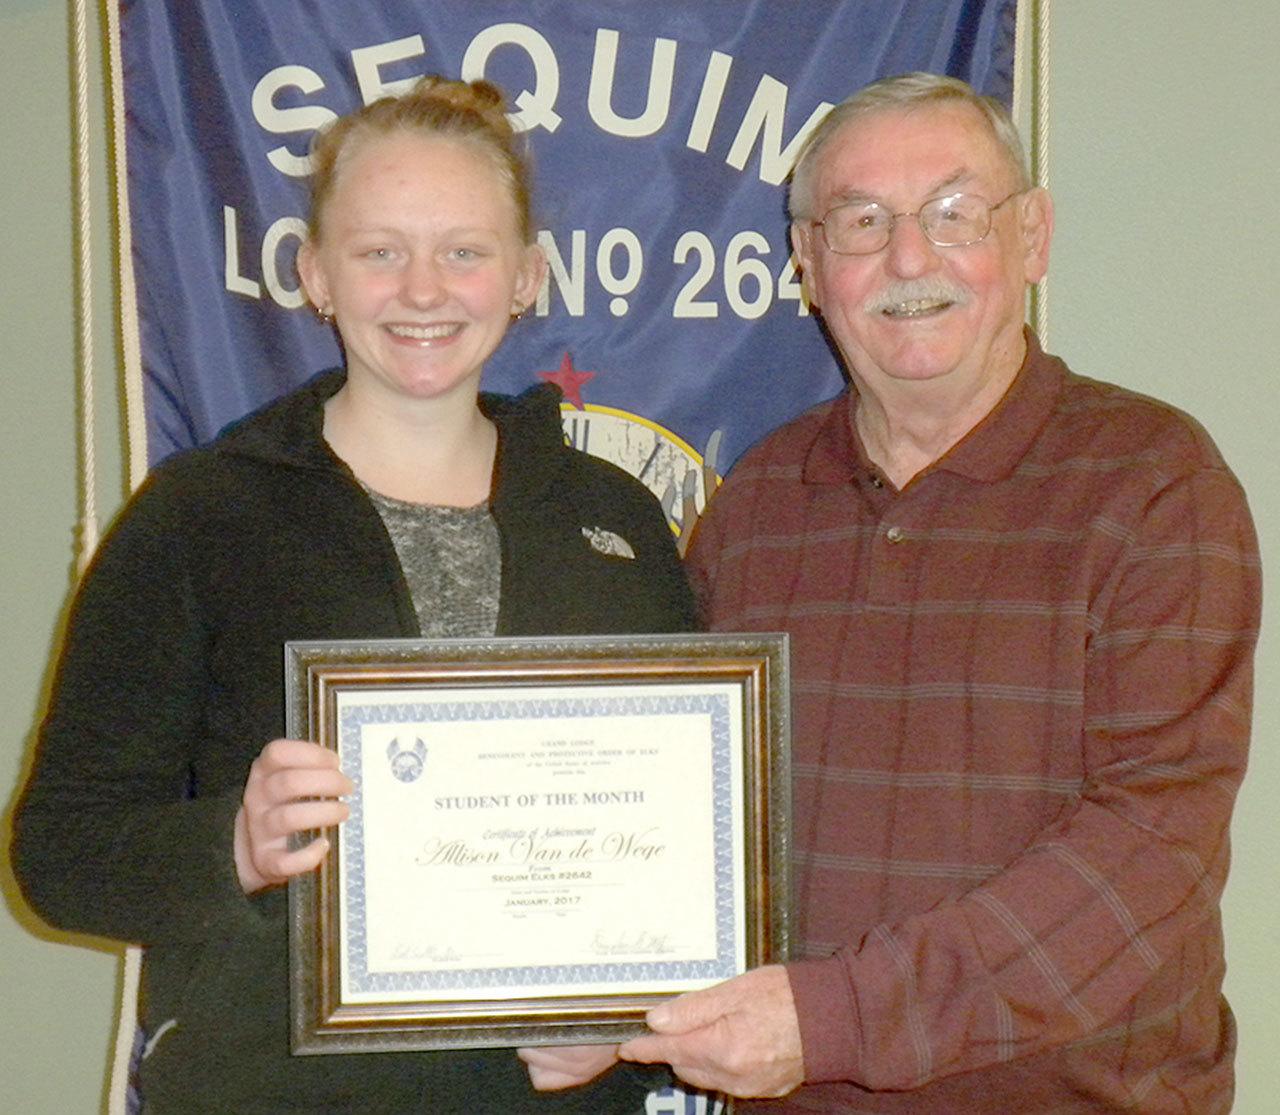 Allison Van De Wege, a 3.9 GPA Sequim High School sophomore, 
was named Student of the Month by the Sequim Elks Lodge at its January social night dinner.                                 She was selected for her high academic achievements and student involvement at SHS. Her current class schedule includes Algebra 2, ceramics, photography, Spanish 2, chemistry and World Literature. Her interests are cooking, hiking and being around people. She is also involved in Leadership Class, dance and Aspire, volunteering at the Sequim Food Bank, FBLA and Be the Change Club. Her future plans are to attend college on the West Coast and major in elementary education. She is the daughter of Kevin and Jennifer Van De Wege.                                 Pictured are Van De Wege and Doug Metz of the Sequim Elks Lodge.